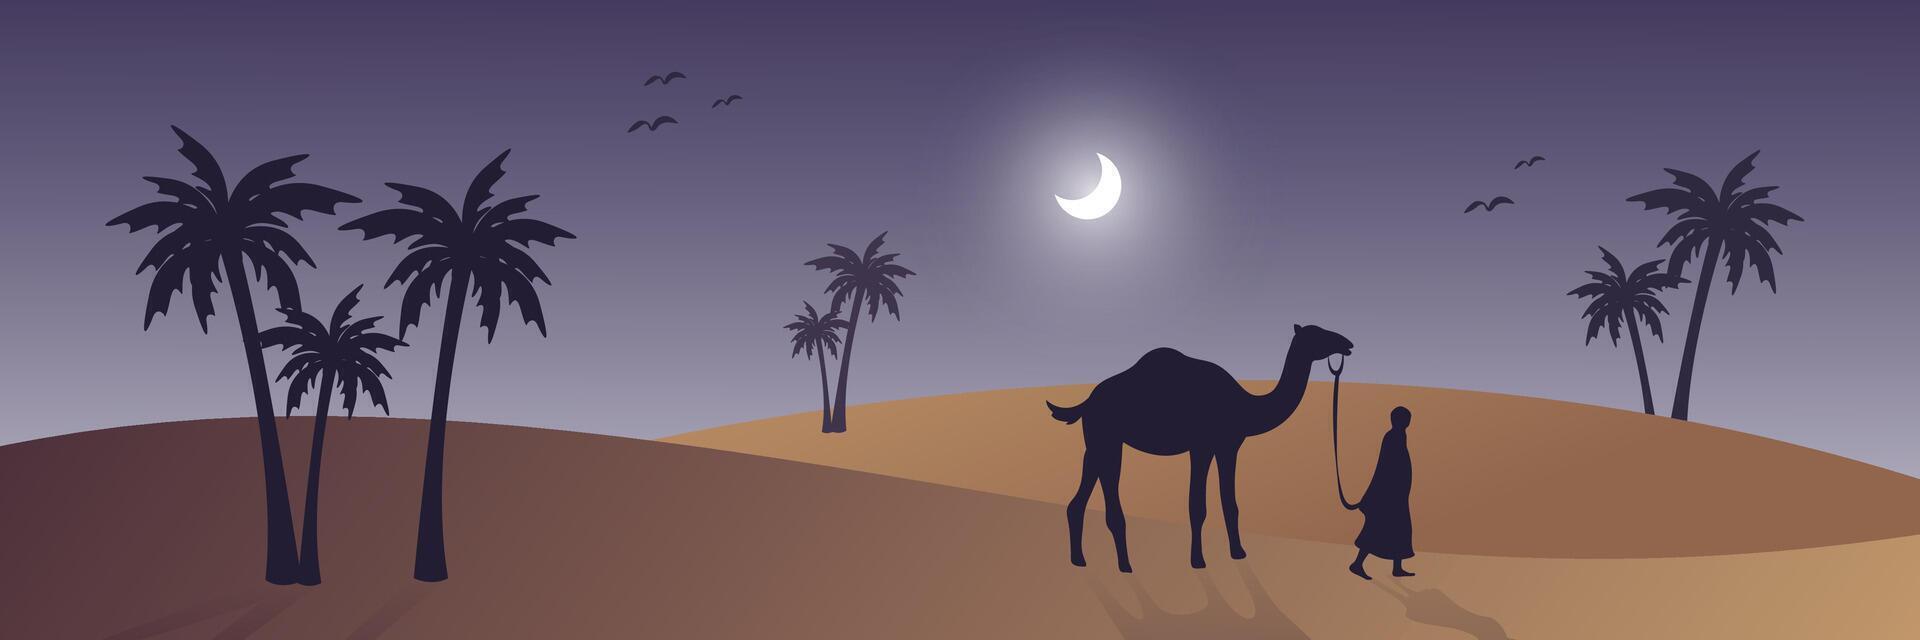 arabesque web horizontal banner, silhouette camel and palm tree, beautiful moonlight, night view in desert area, islamic background template vector